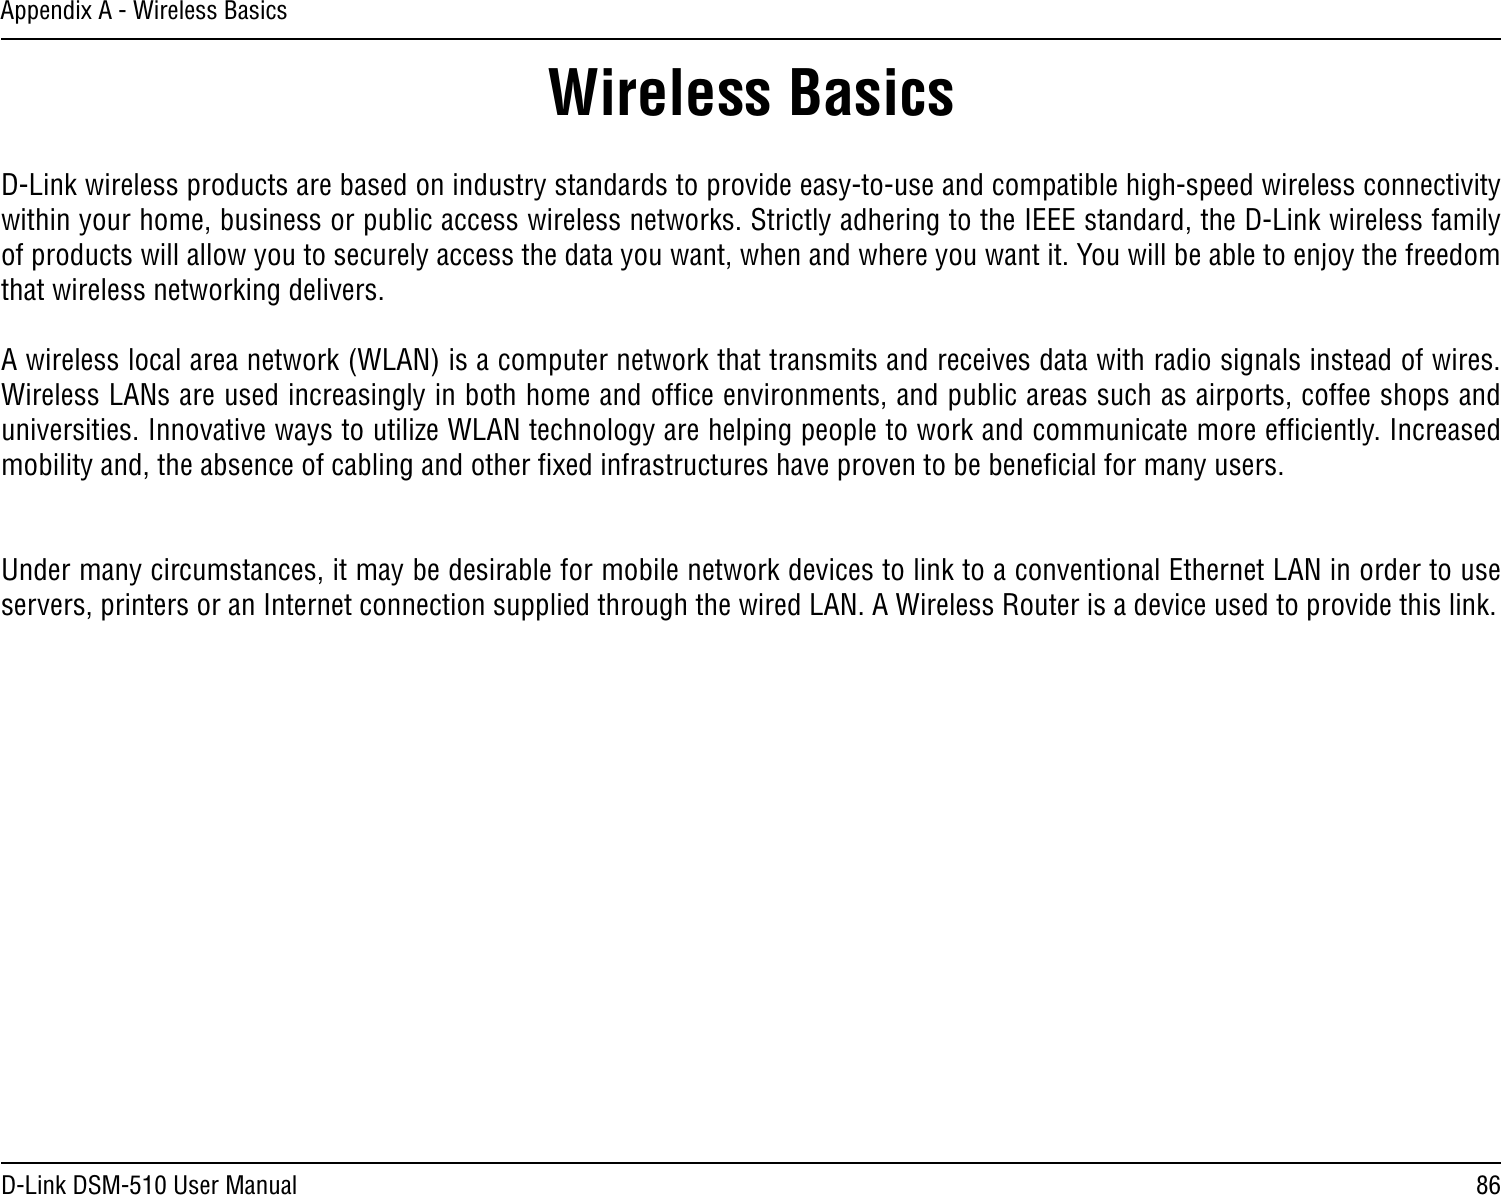 86D-Link DSM-510 User ManualAppendix A - Wireless BasicsD-Link wireless products are based on industry standards to provide easy-to-use and compatible high-speed wireless connectivity within your home, business or public access wireless networks. Strictly adhering to the IEEE standard, the D-Link wireless family of products will allow you to securely access the data you want, when and where you want it. You will be able to enjoy the freedom that wireless networking delivers.A wireless local area network (WLAN) is a computer network that transmits and receives data with radio signals instead of wires. Wireless LANs are used increasingly in both home and ofﬁce environments, and public areas such as airports, coffee shops and universities. Innovative ways to utilize WLAN technology are helping people to work and communicate more efﬁciently. Increased mobility and, the absence of cabling and other ﬁxed infrastructures have proven to be beneﬁcial for many users. Under many circumstances, it may be desirable for mobile network devices to link to a conventional Ethernet LAN in order to use servers, printers or an Internet connection supplied through the wired LAN. A Wireless Router is a device used to provide this link.Wireless Basics